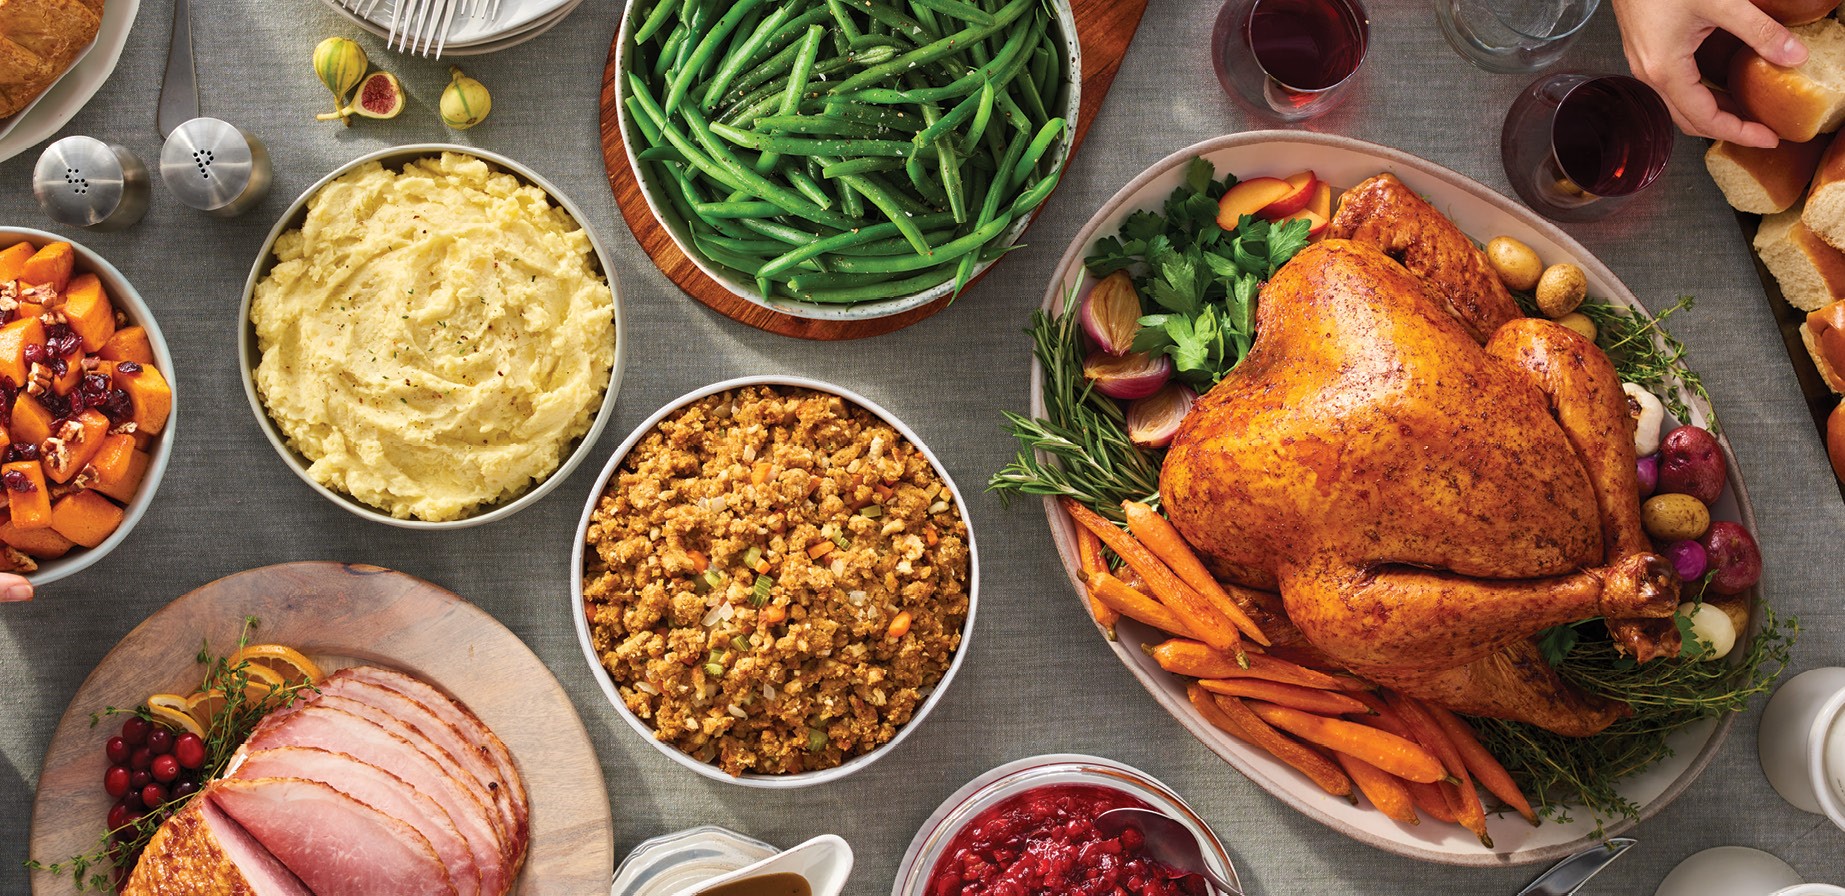 Easy-to-implement tips and tricks for a healthier Thanksgiving